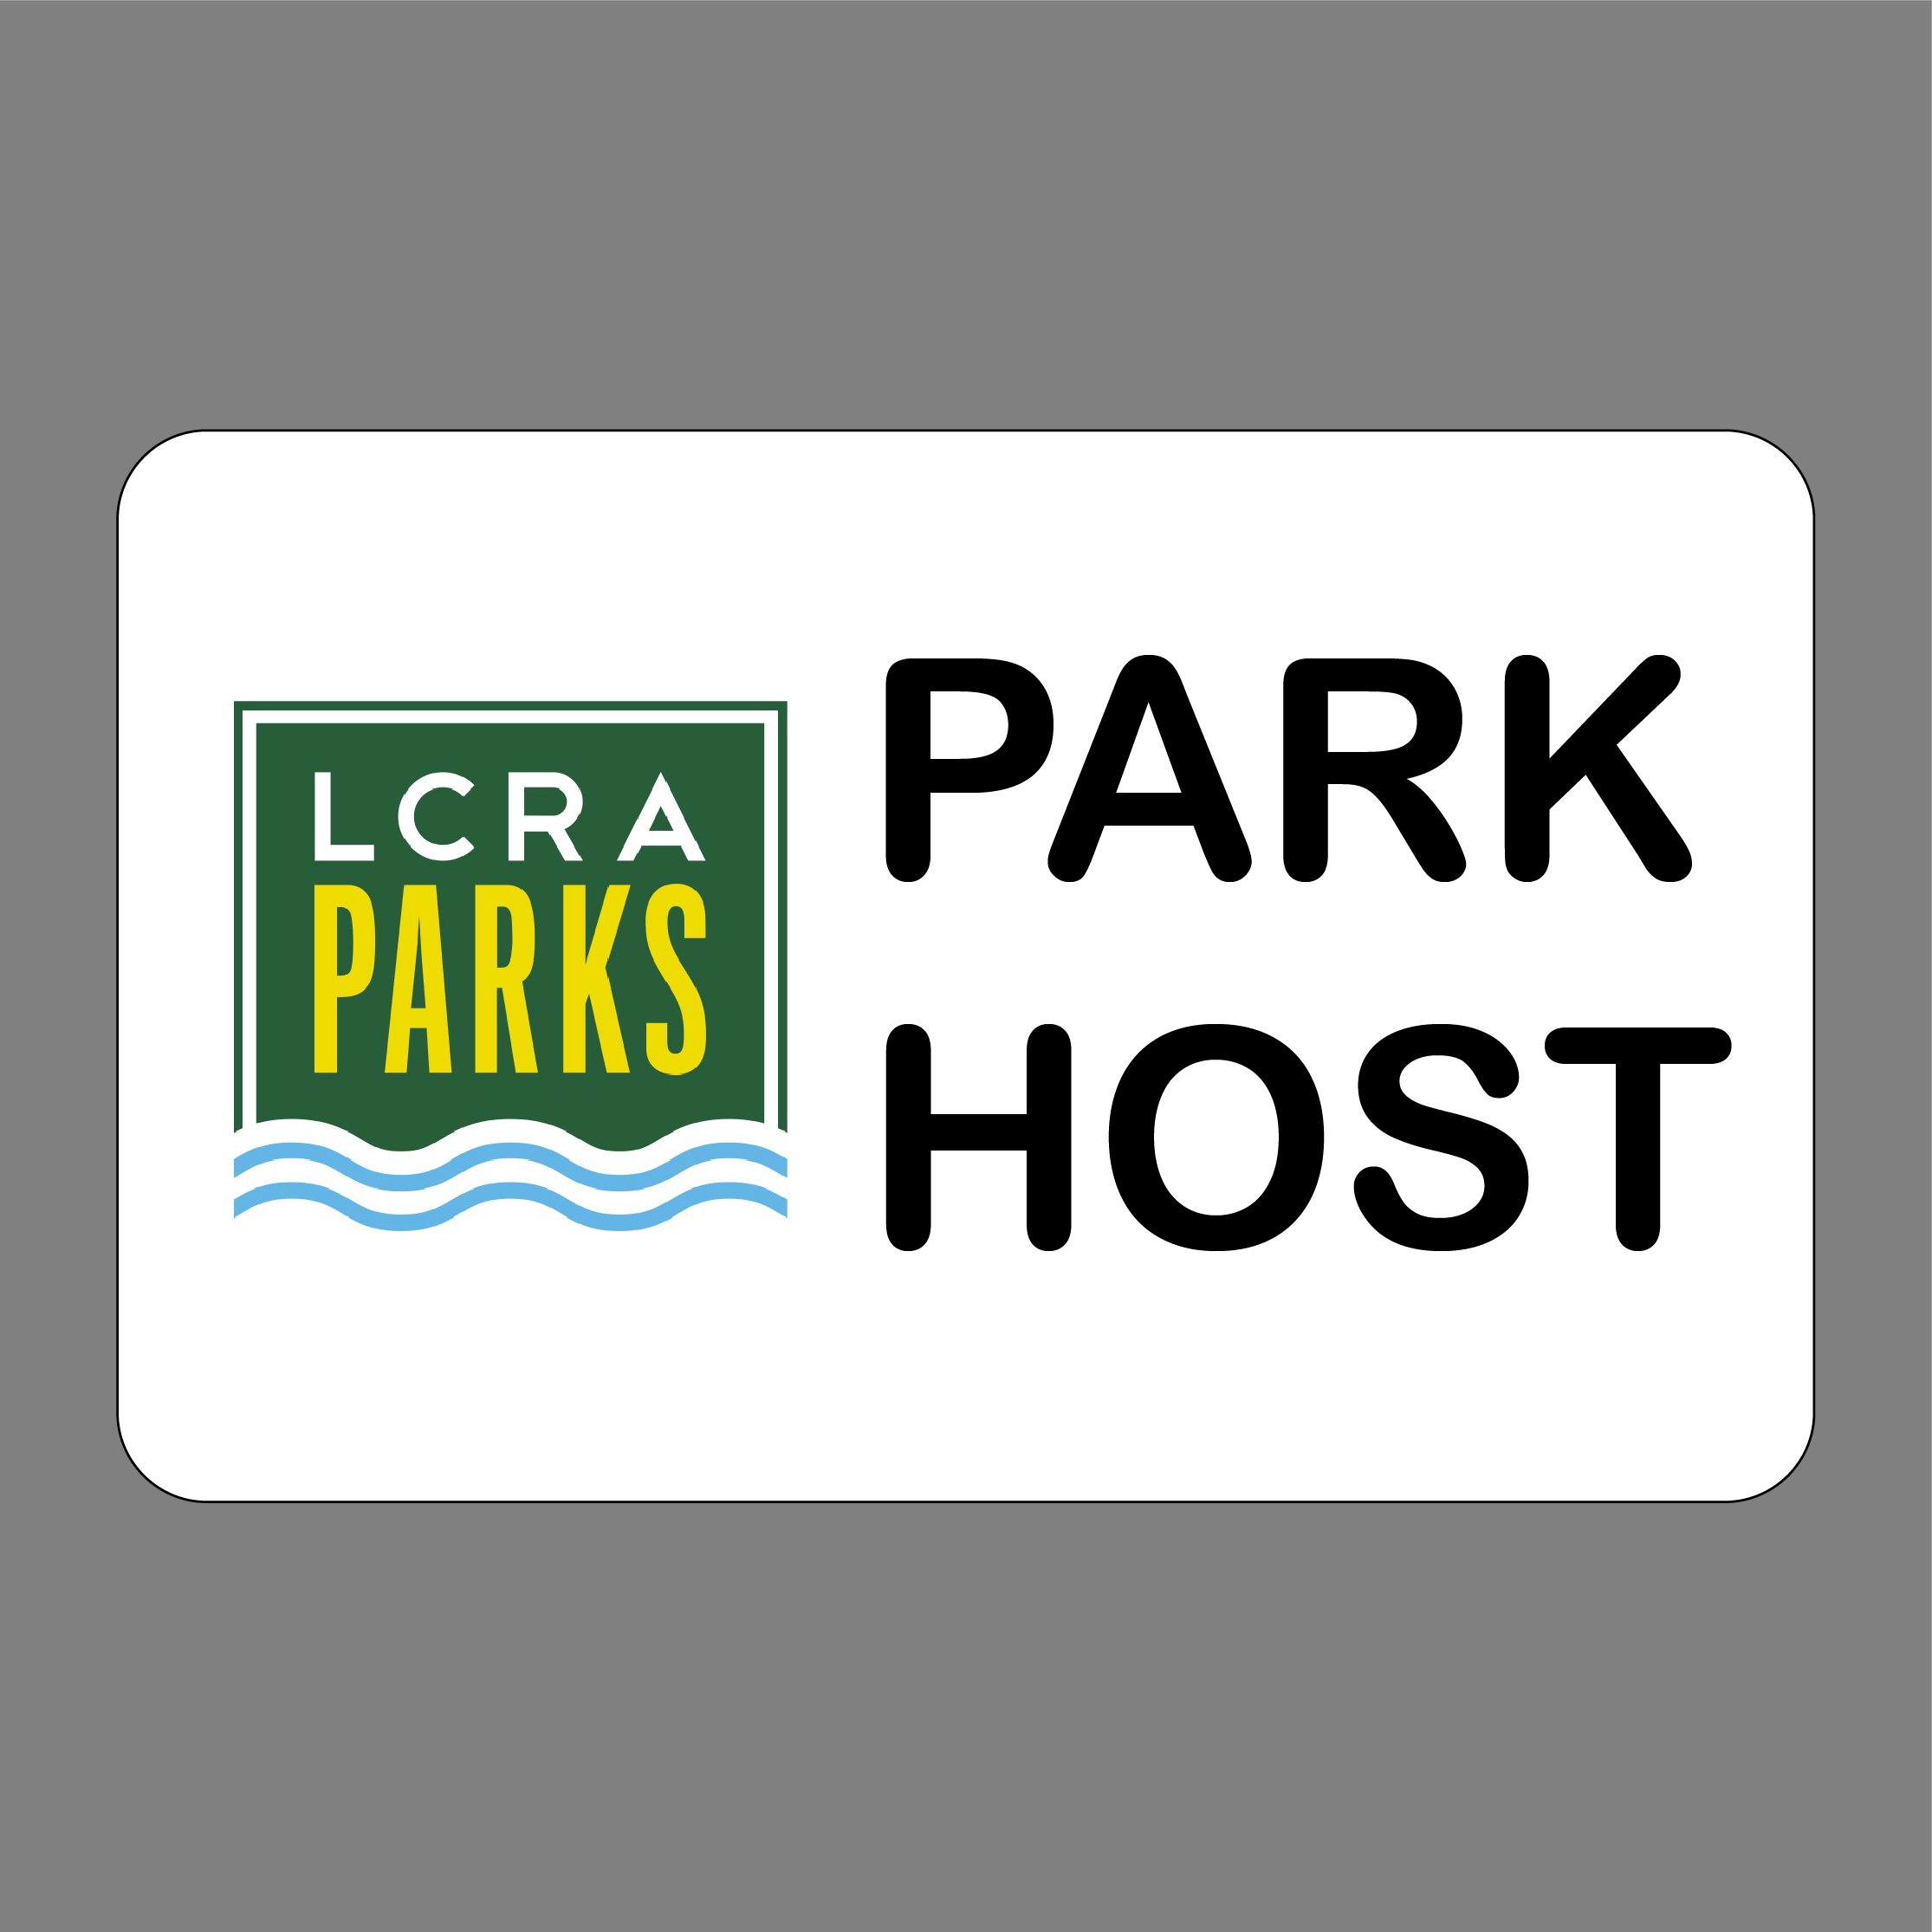 LCRA Park Host Product Image